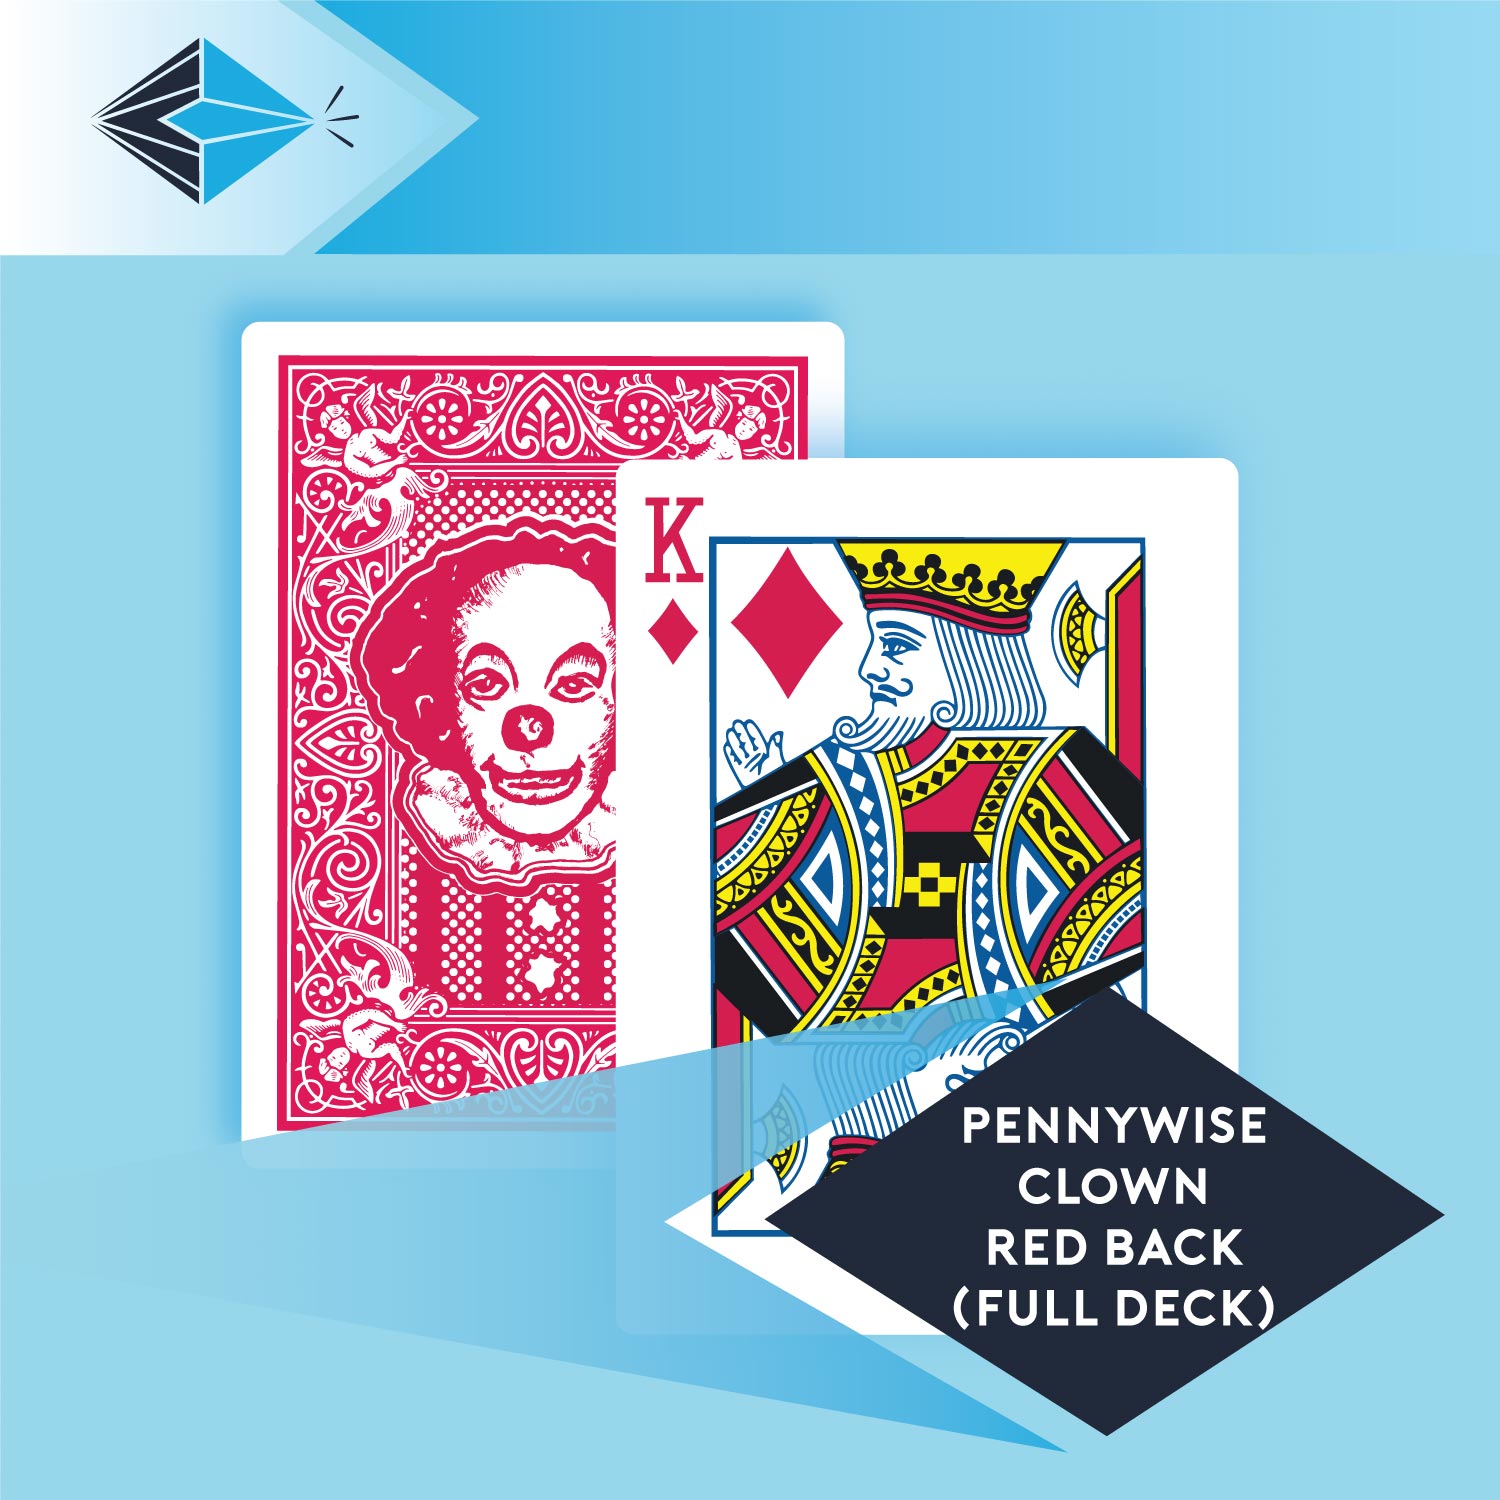 pennywise clown red back full deck playing card Bicycle for magicians printing printers Stockport Manchester UK